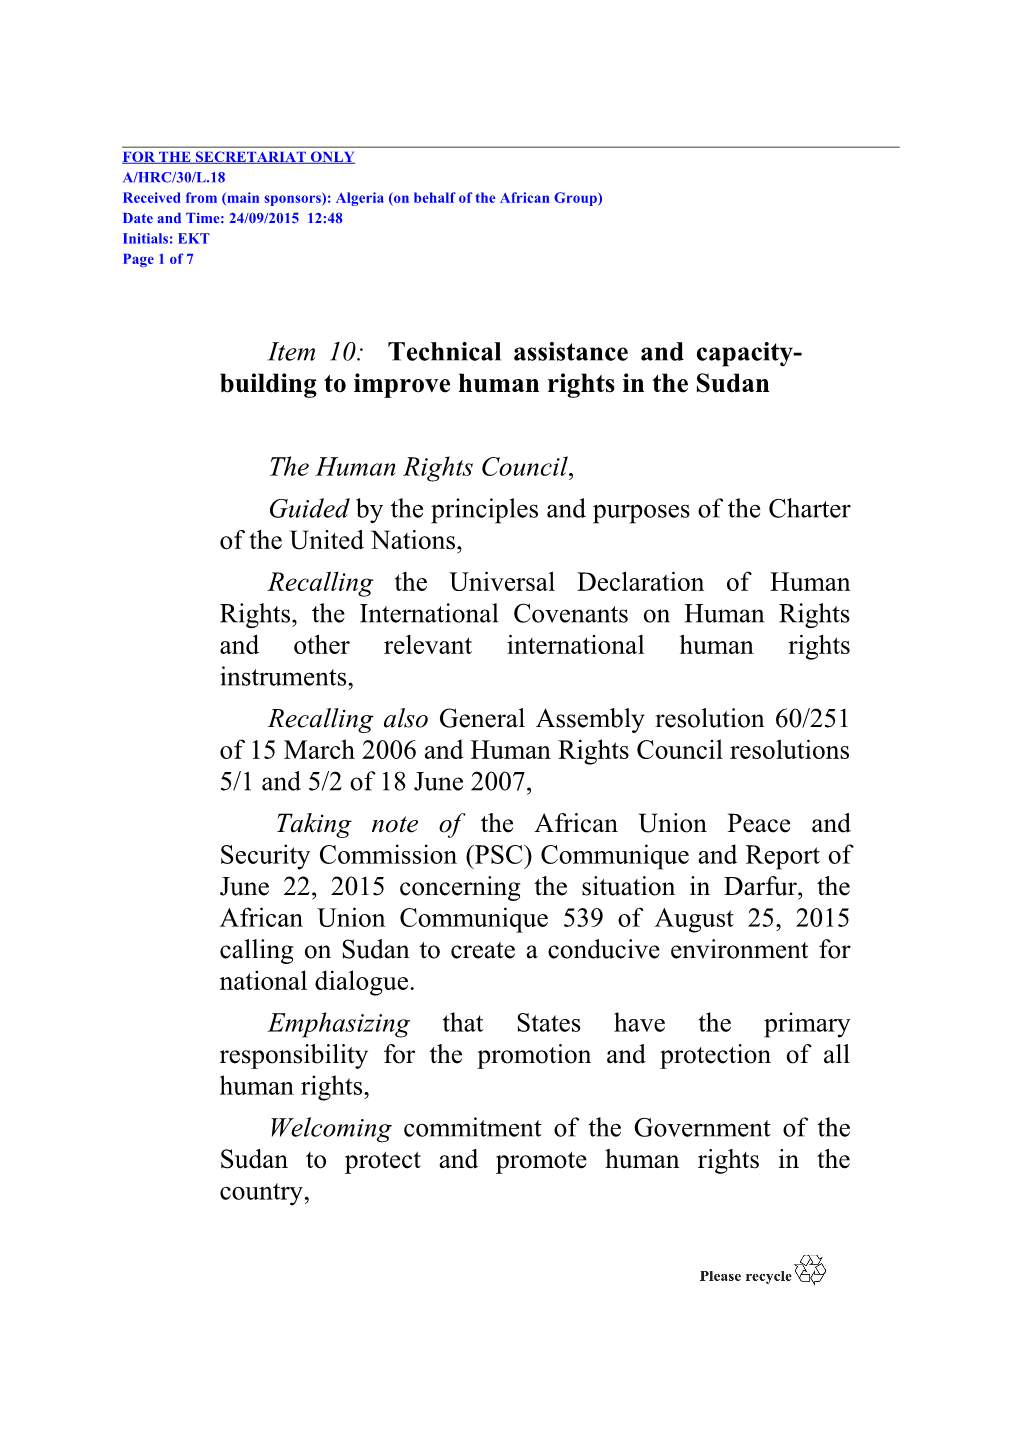 Item 10: Technical Assistance and Capacity-Building to Improve Human Rights in the Sudan